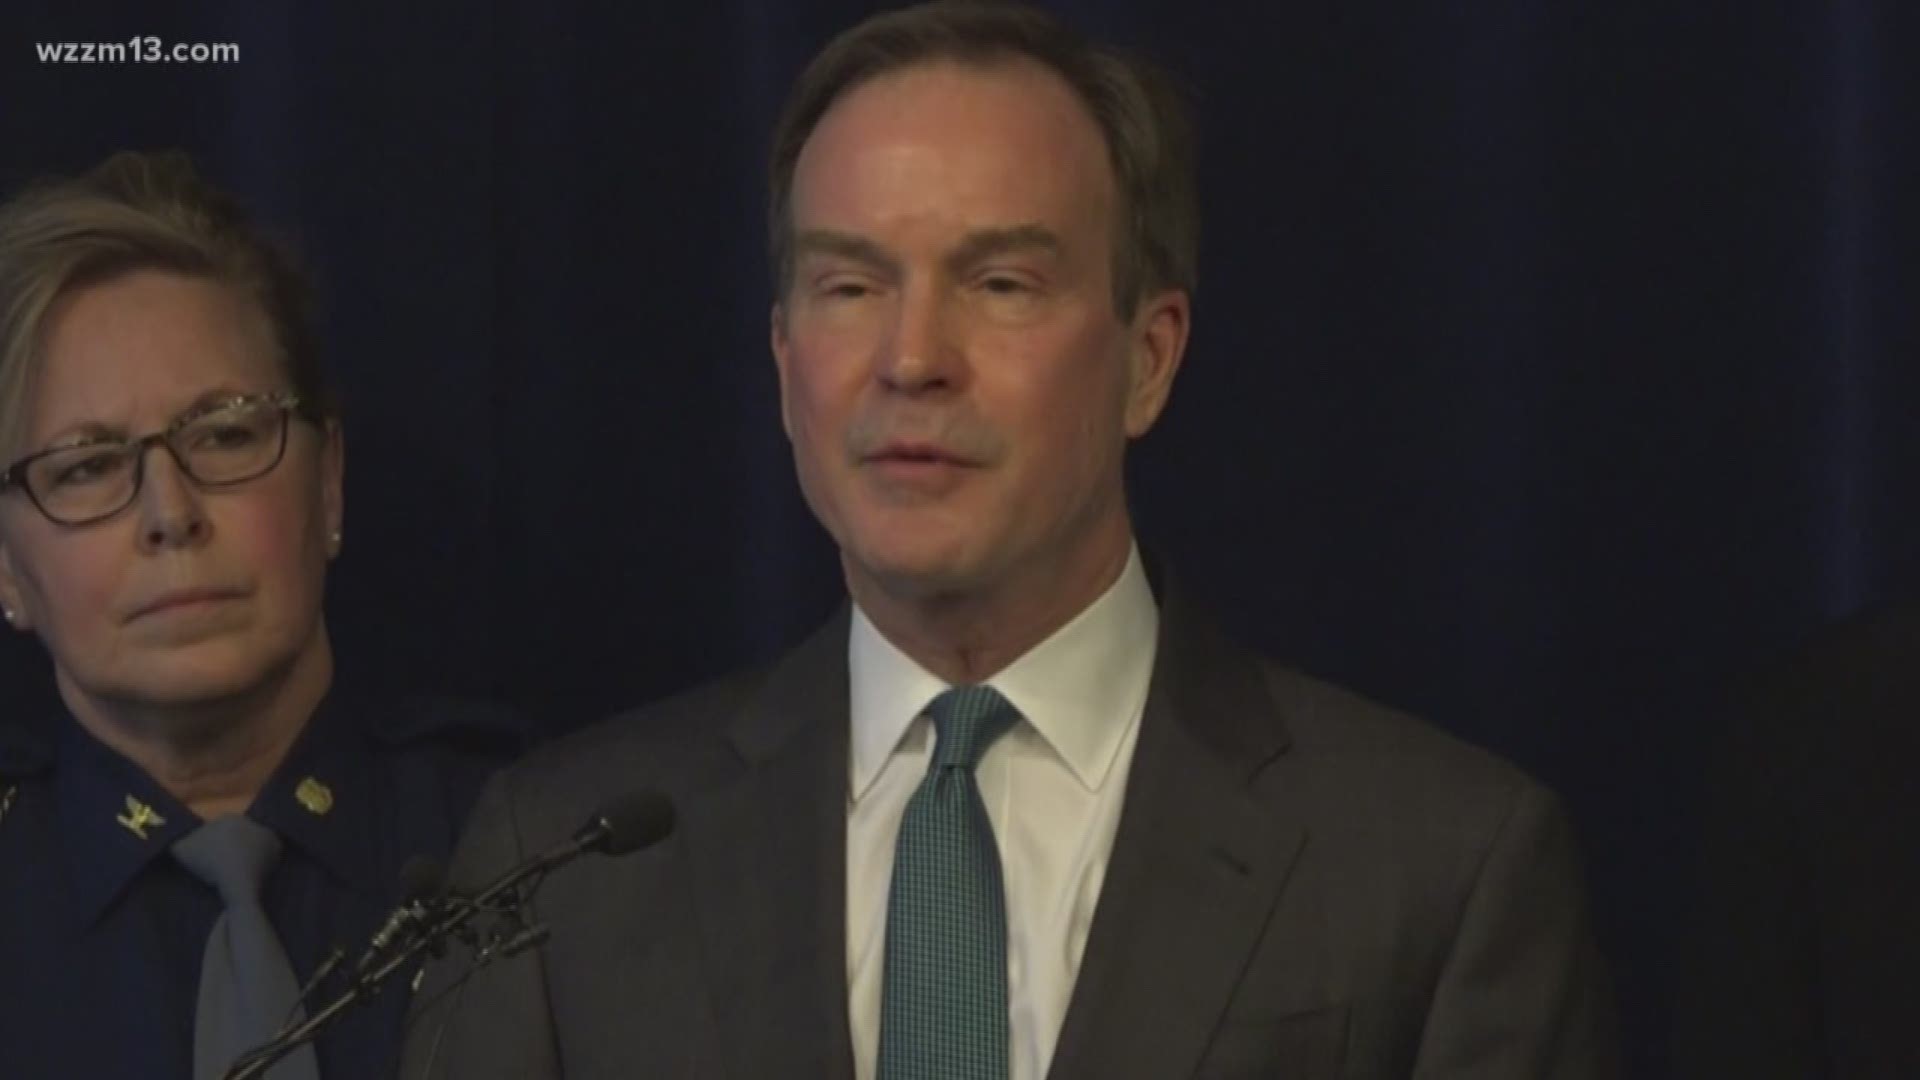 Schuette responds to allegations